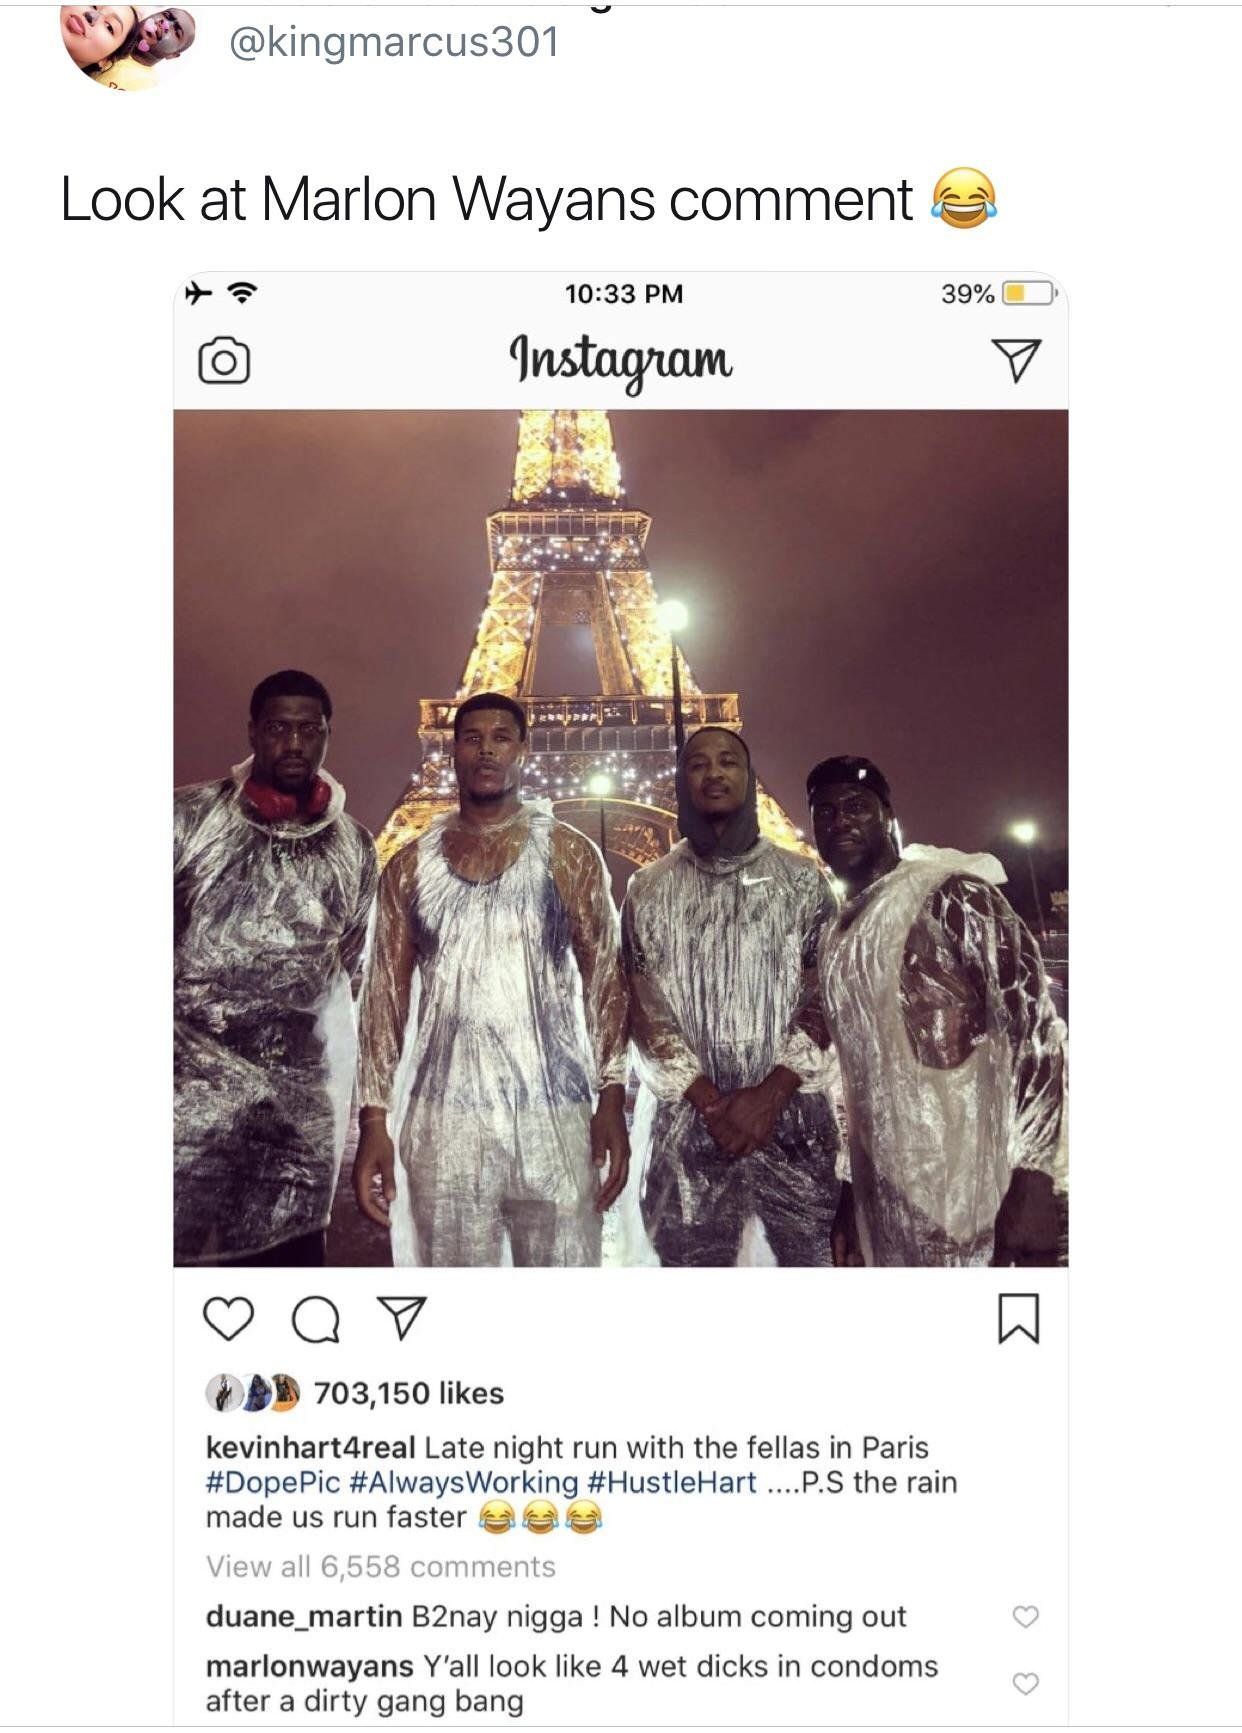 dankness of best black twitter memes - Look at Marlon Wayans comment 39% Instagram Op 703,150 kevin hart4real Late night run with the fellas in Paris Hart ....P.S the rain made us run faster a View all 6,558 duane_martin B2nay nigga! No album coming out m